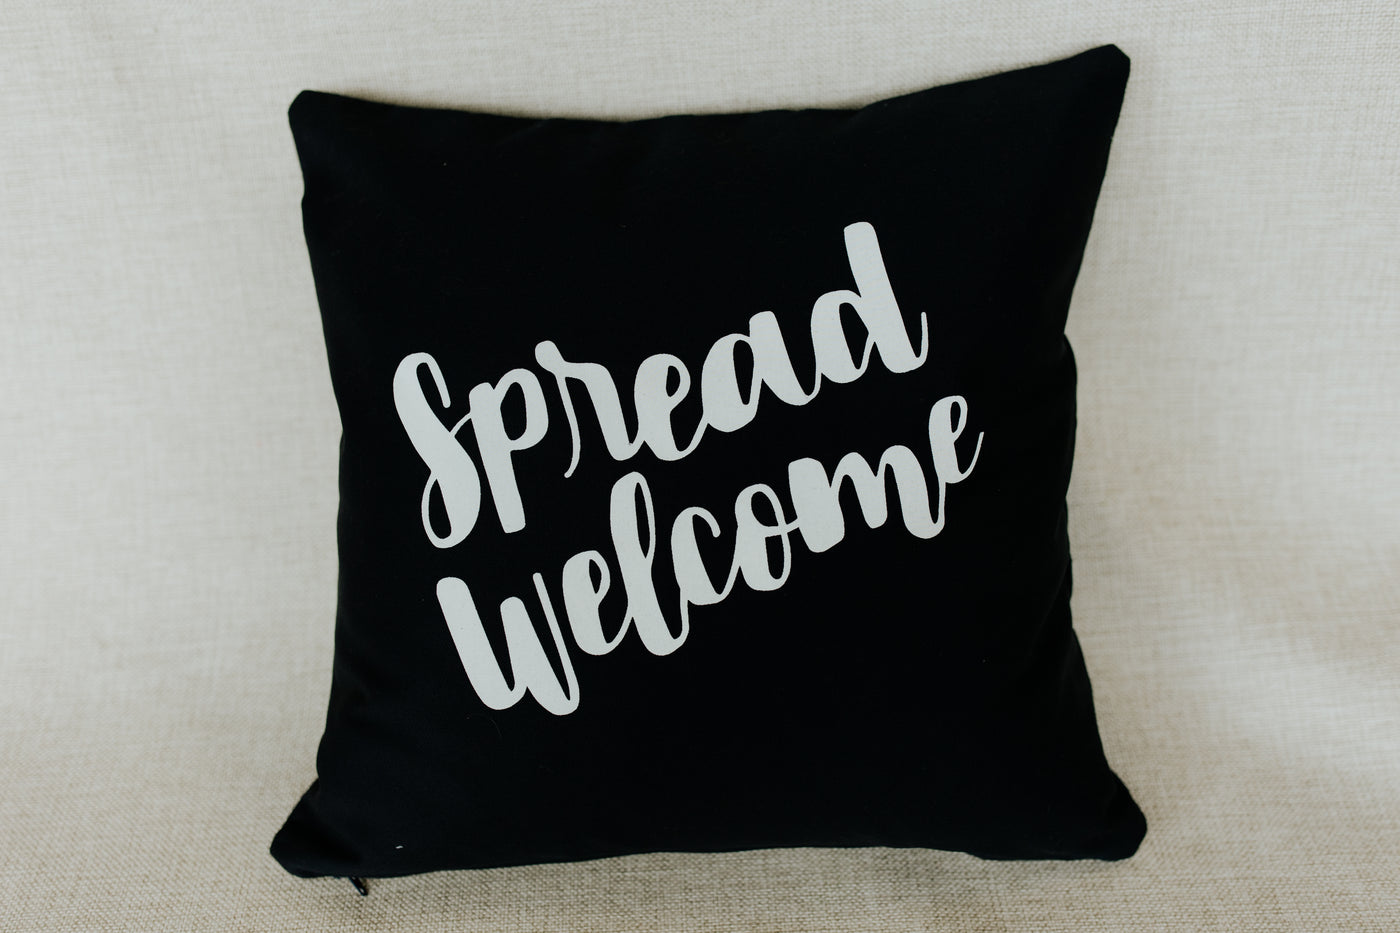 Spread Welcome Pillow Set